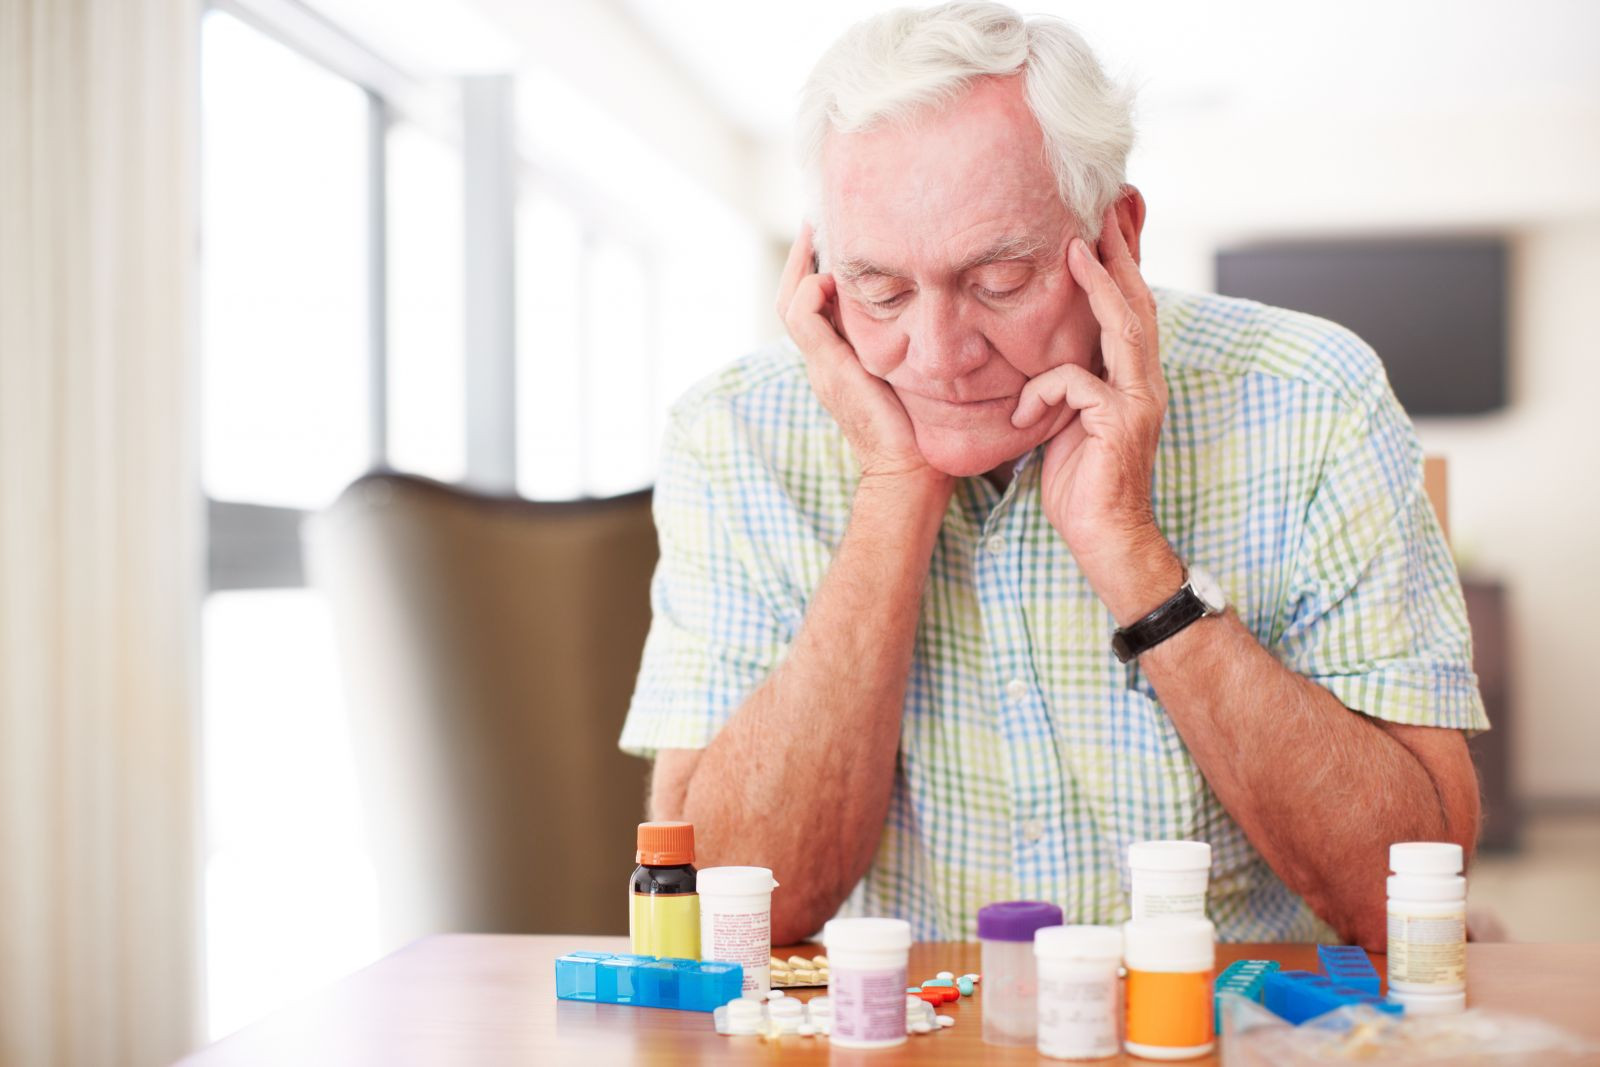 Which Are The Safest Ed Pills For Recovering From An Ed?